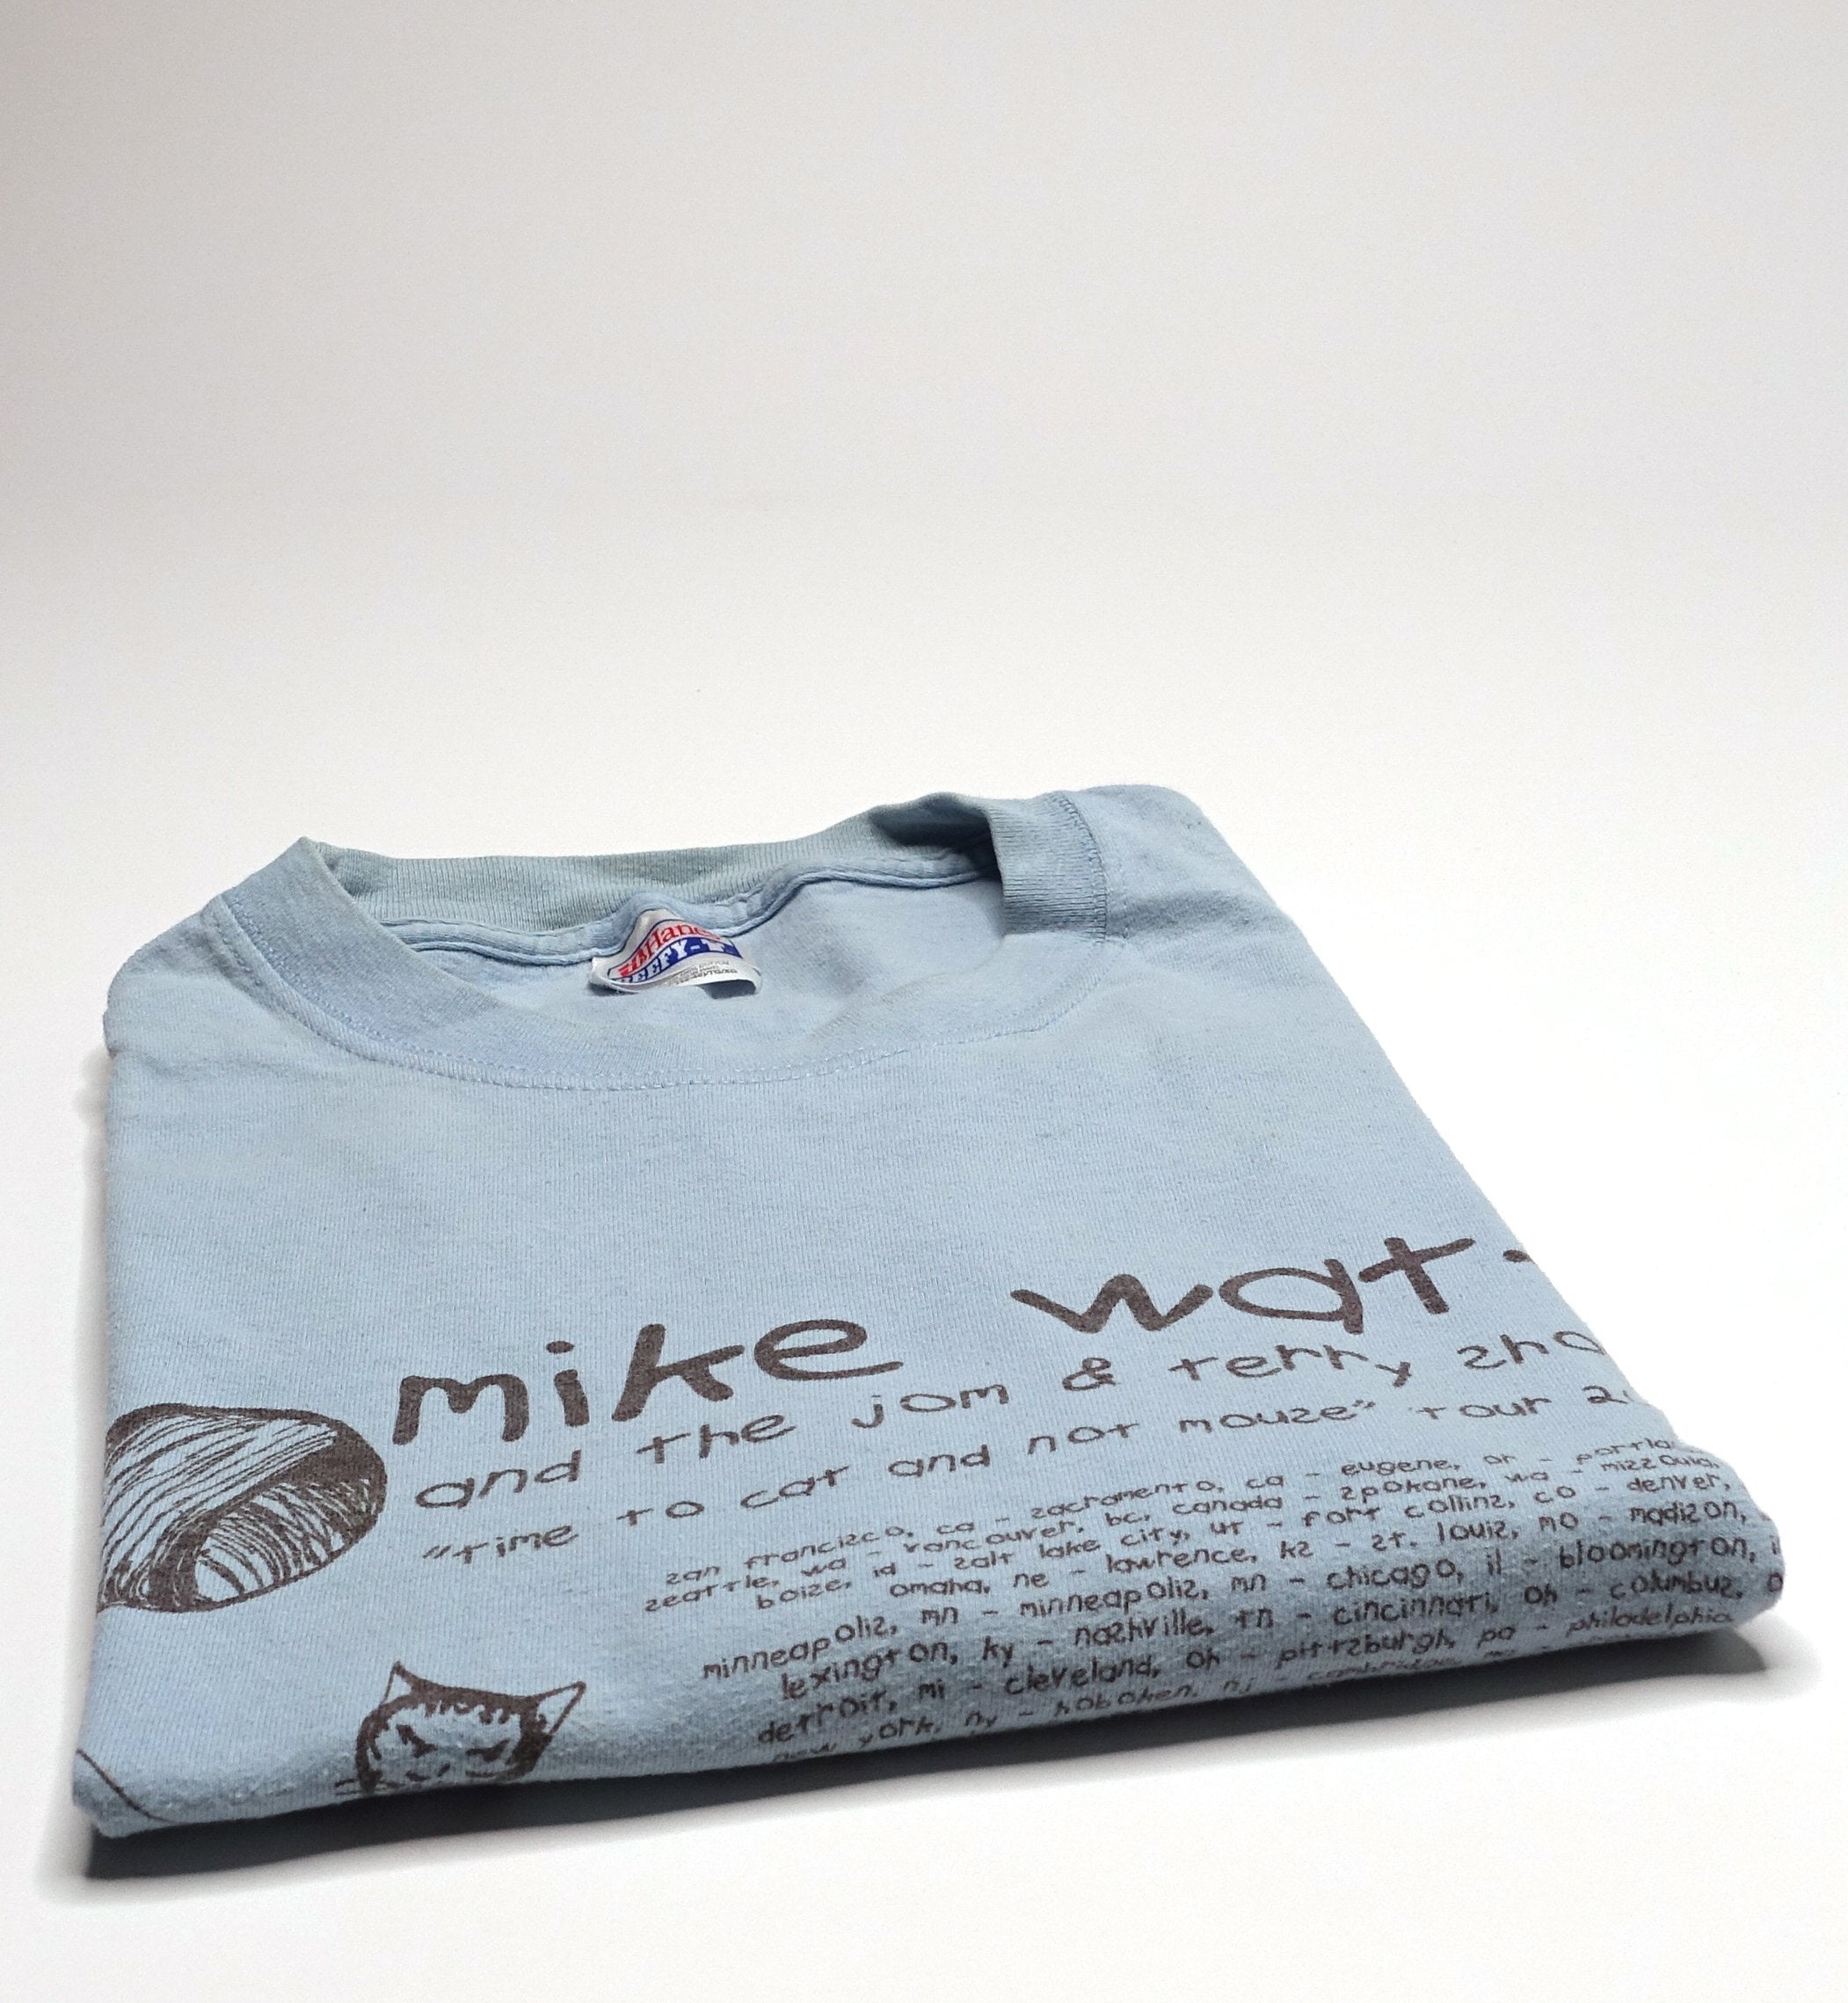 Mike Watt - Time To Cat And Not Mouse 2001 Tour Shirt Size XL